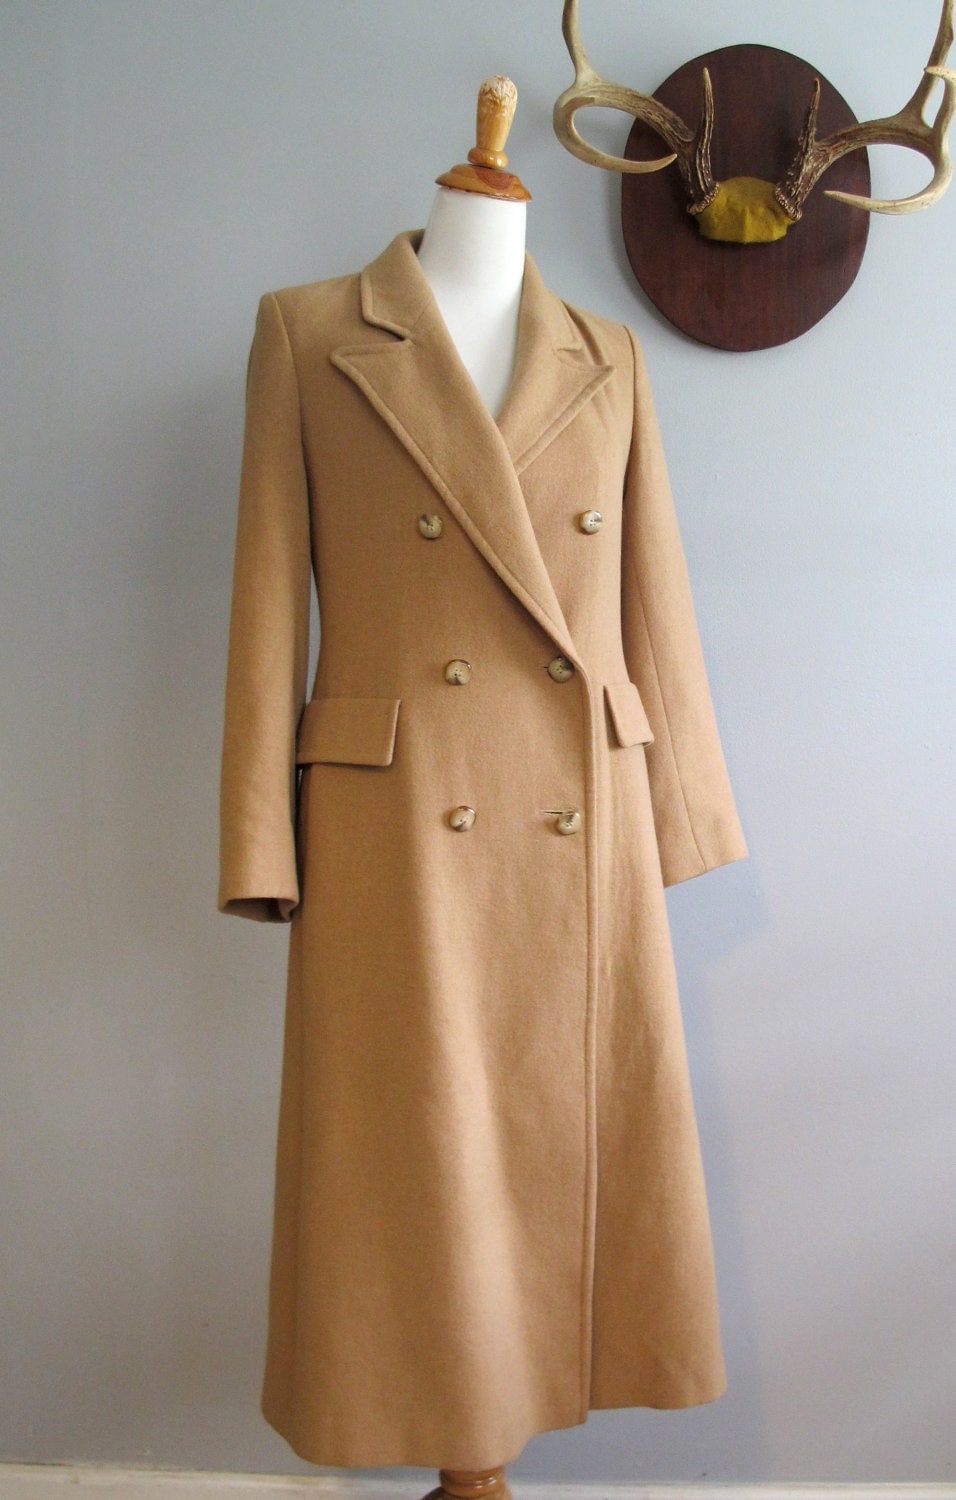 Vintage Camel Hair Double Breasted Coat // by magnoliavintageco